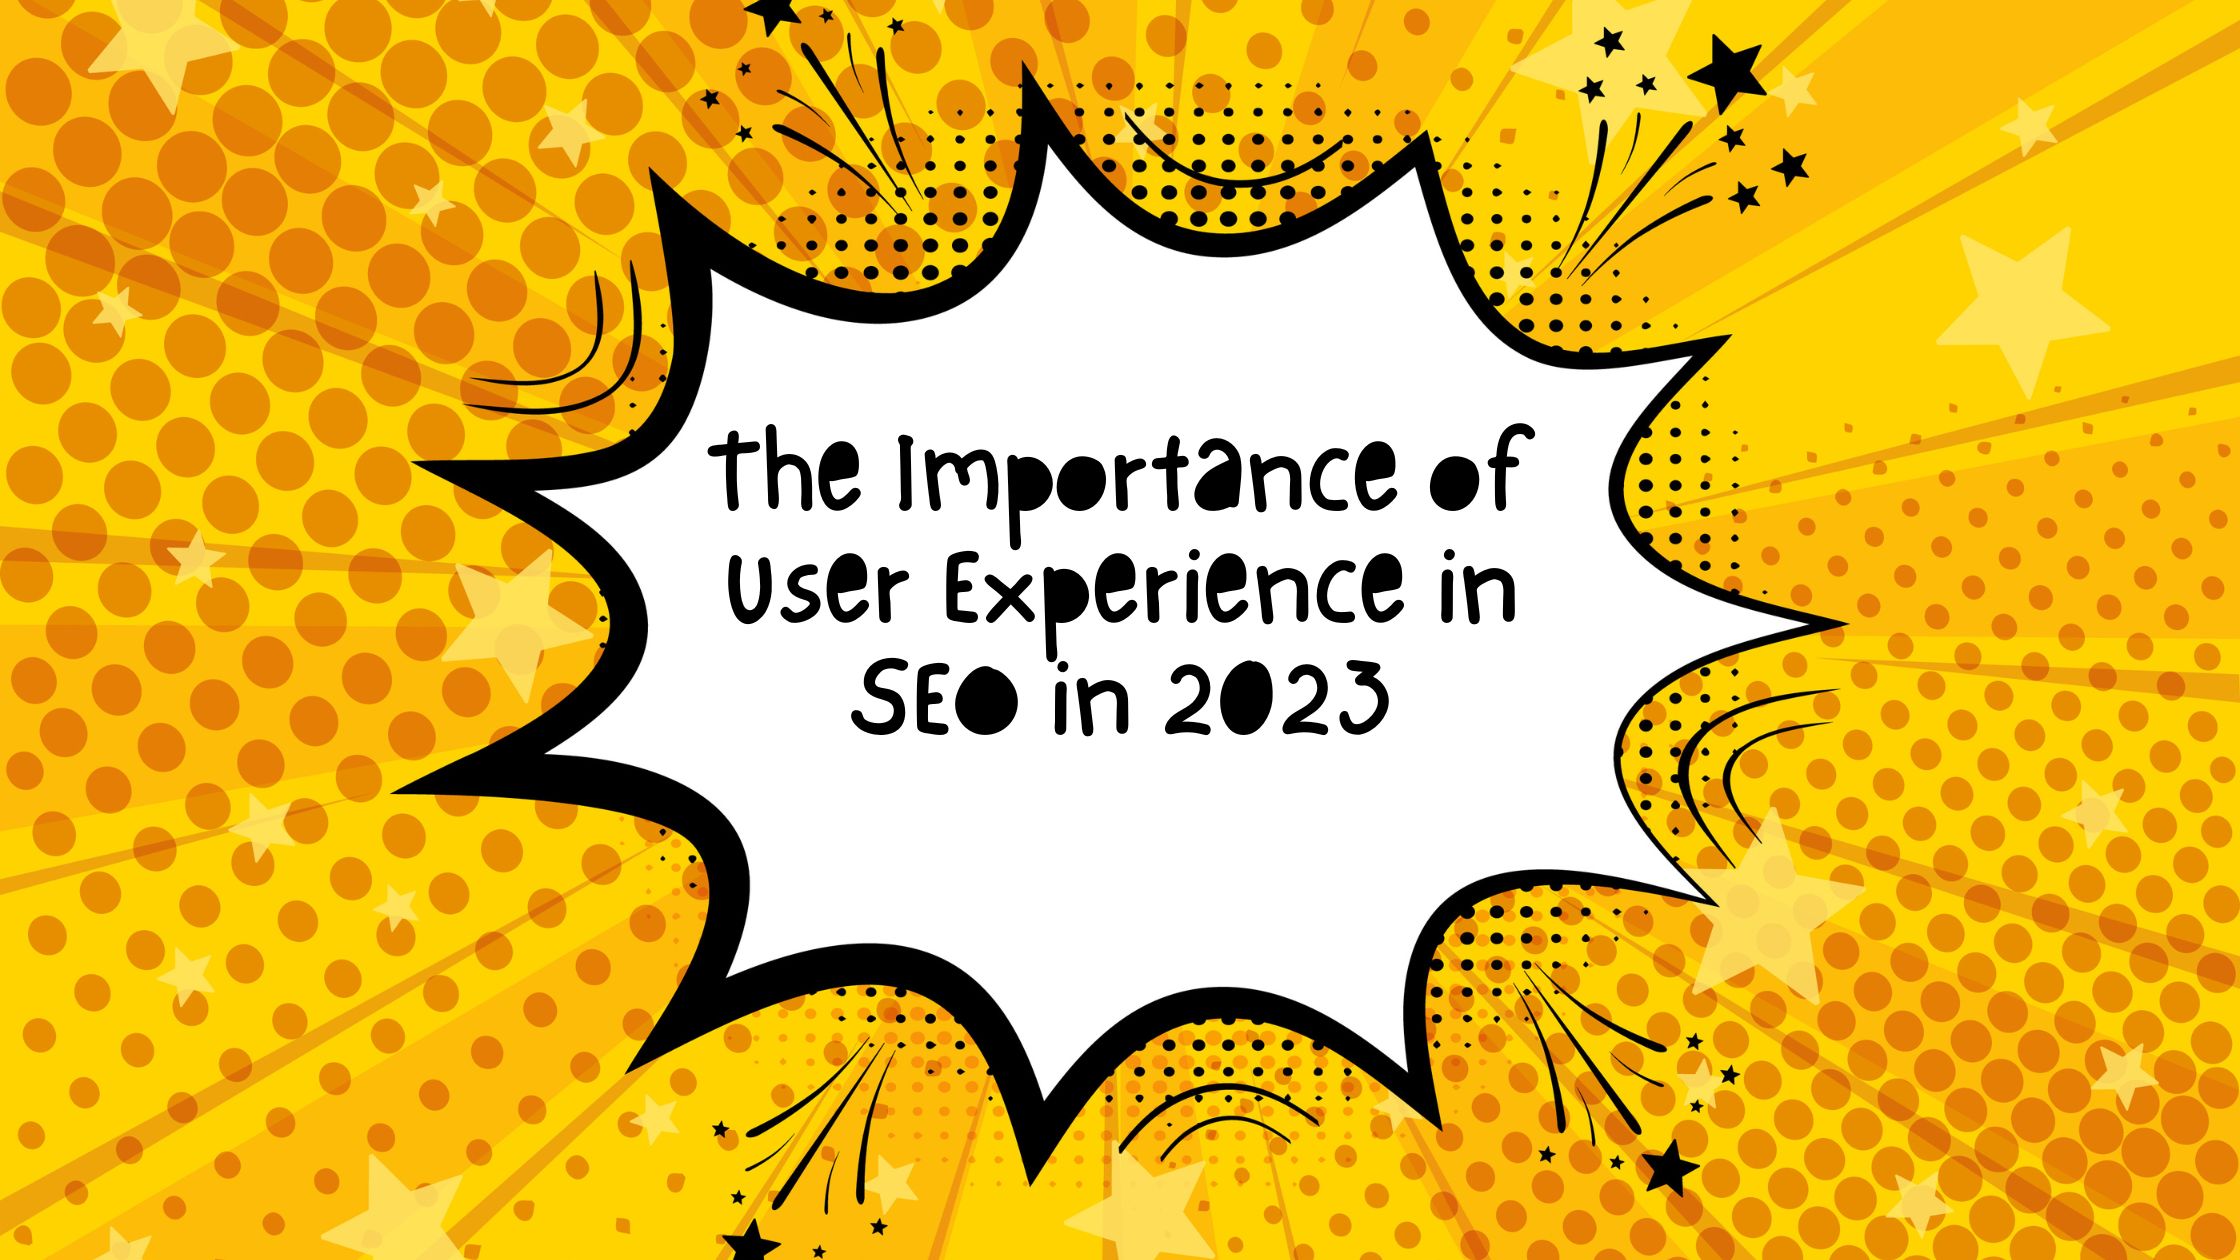 The Importance of User Experience in SEO in 2023